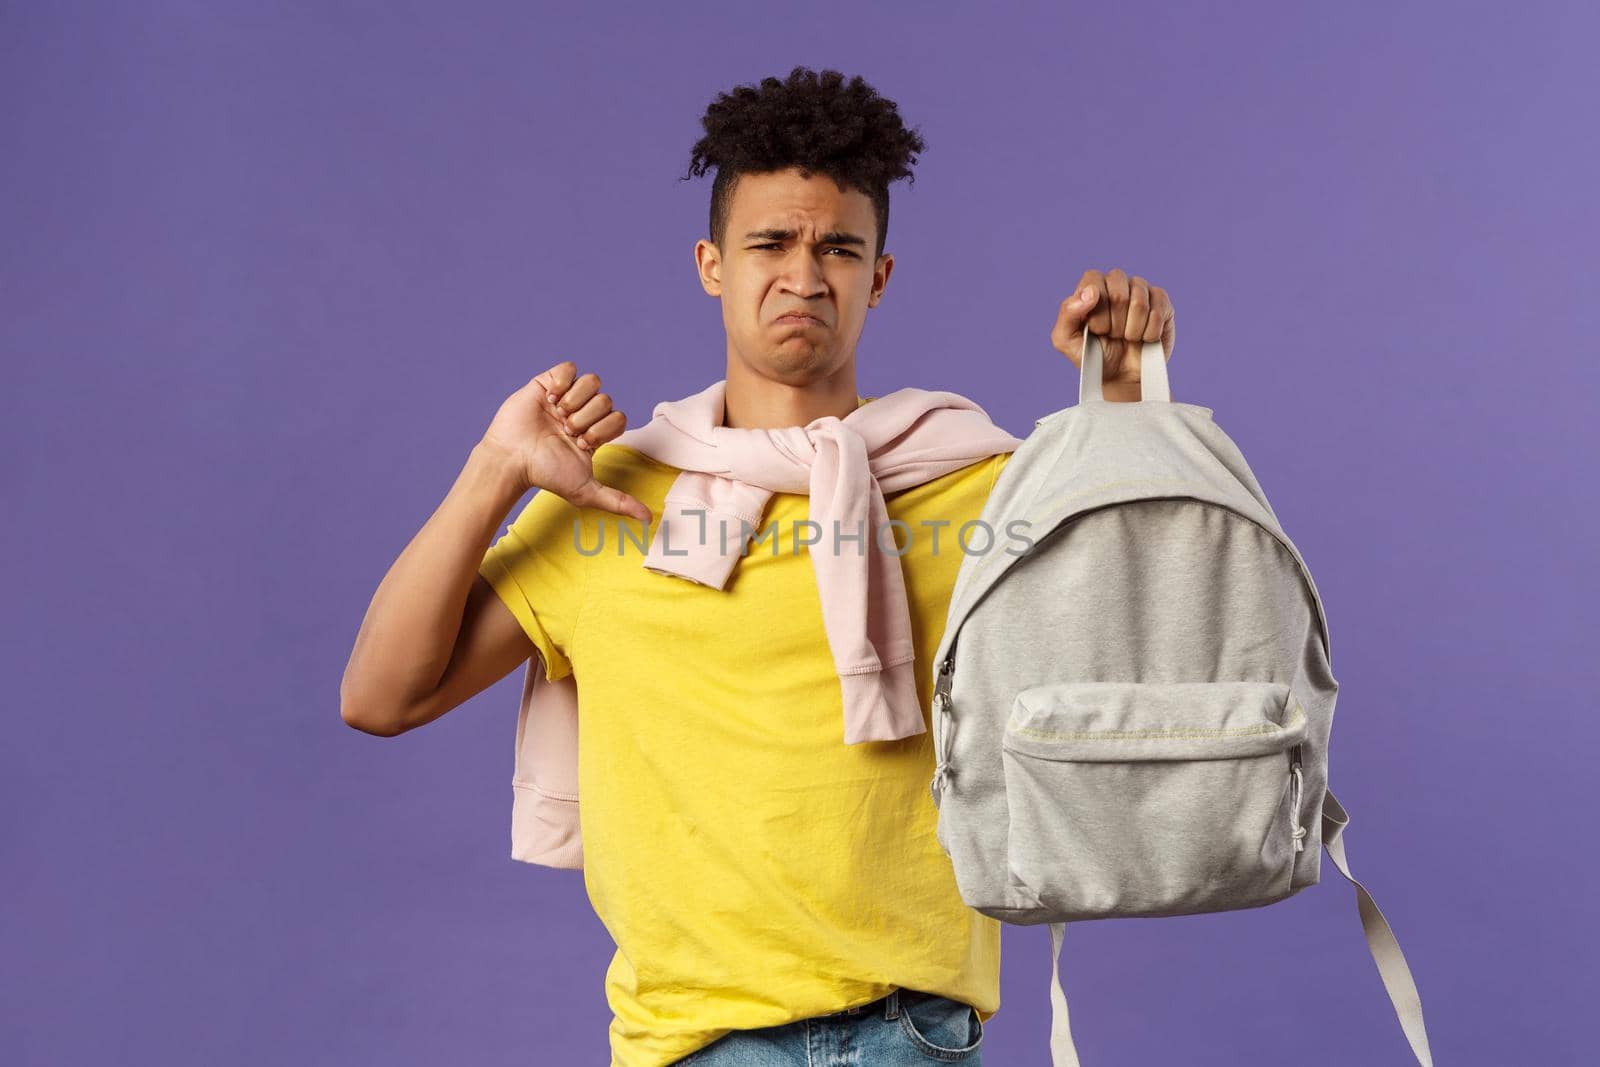 Education, university and trends concept. Portrait of gloomy disappointed young male student complaining on ugly new backpack, show thumbs-down and grimacing displeased, purple background.